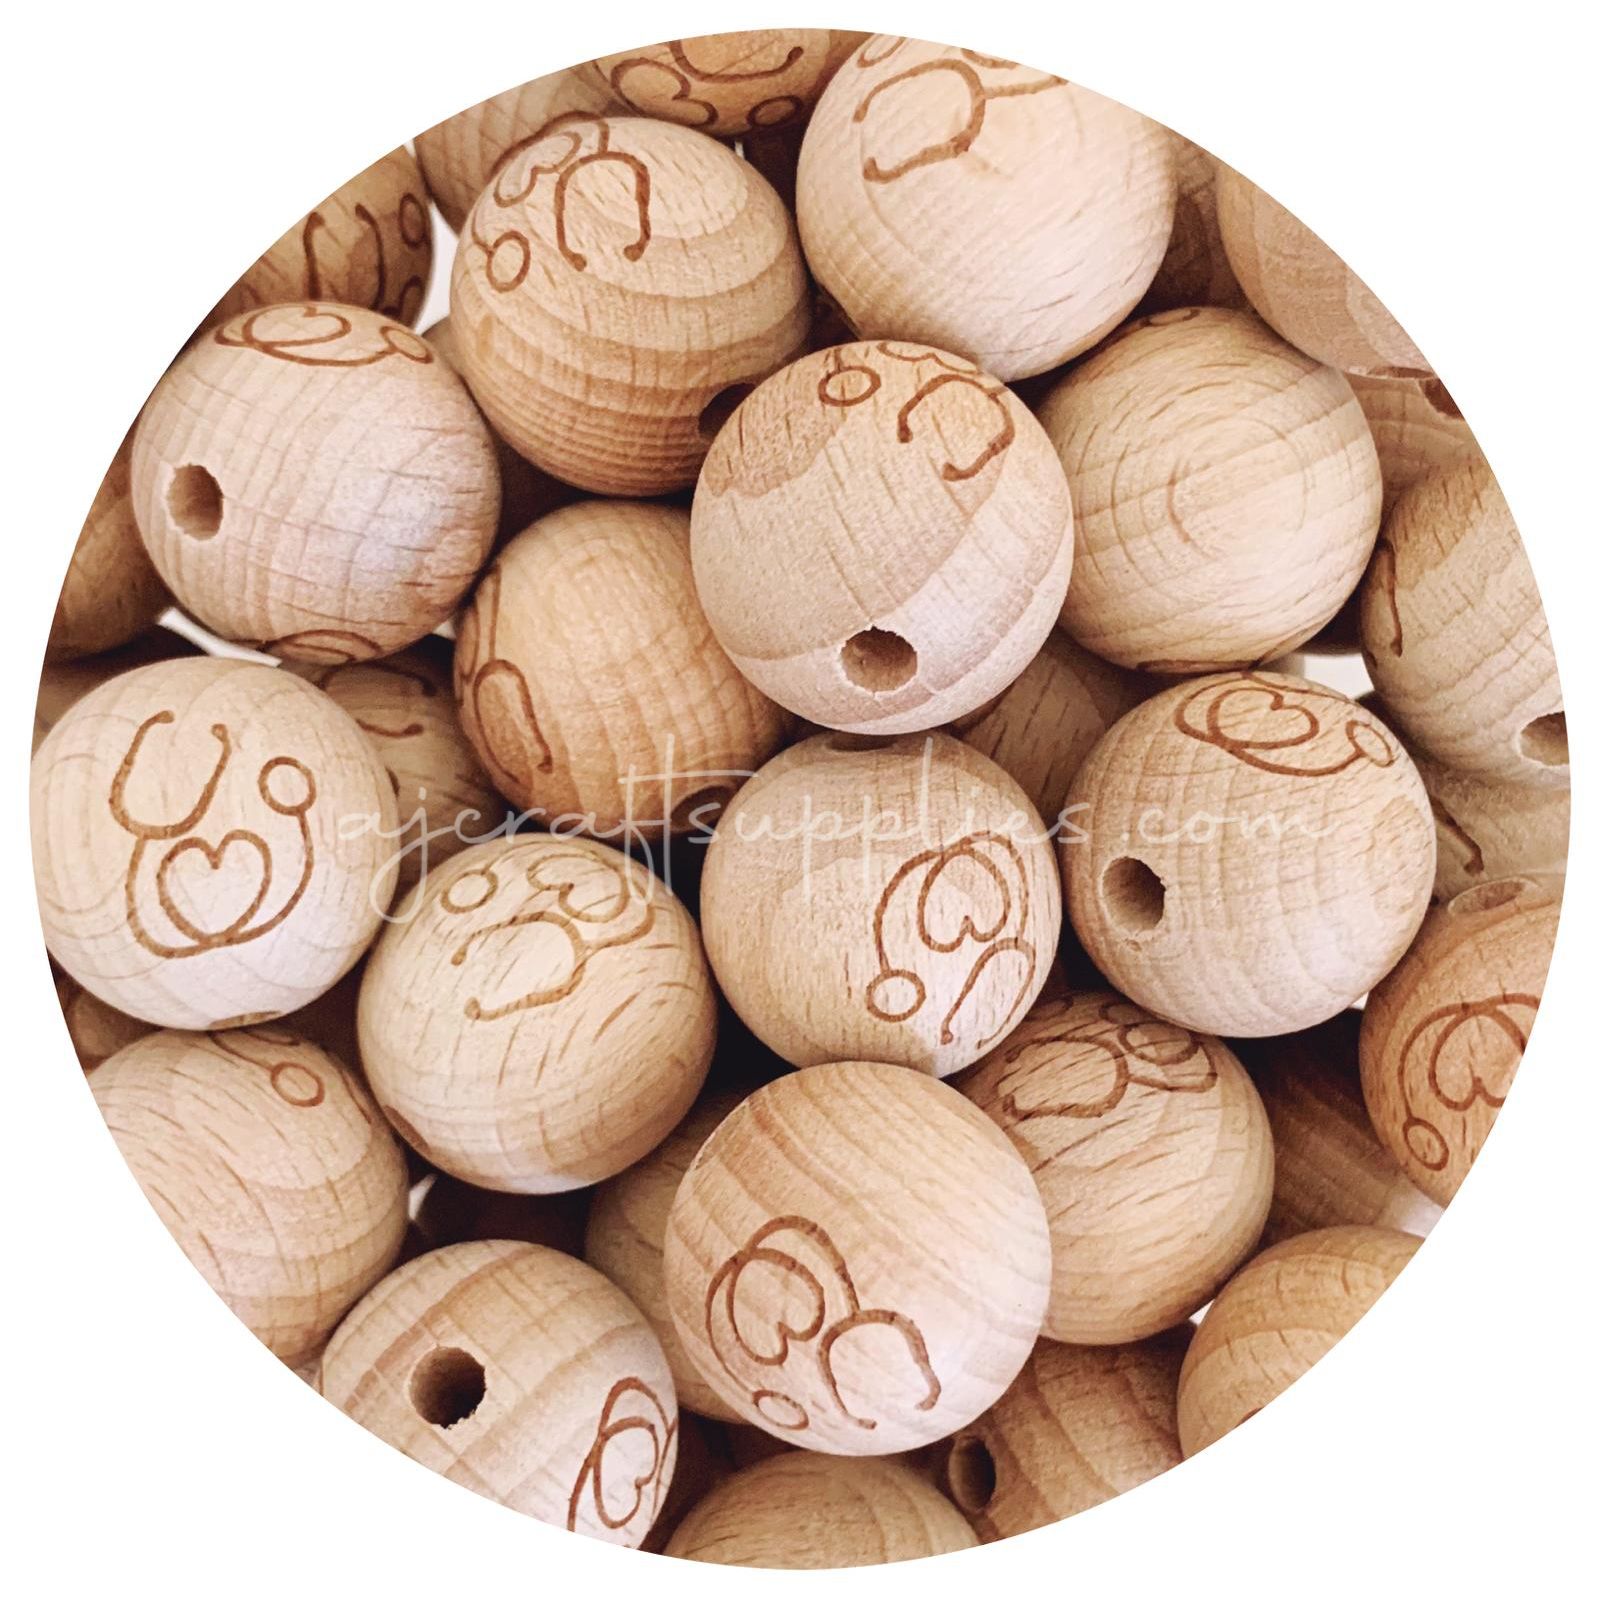 Beech Wood Engraved Beads (Stethoscope) - 20mm Round - 5 beads